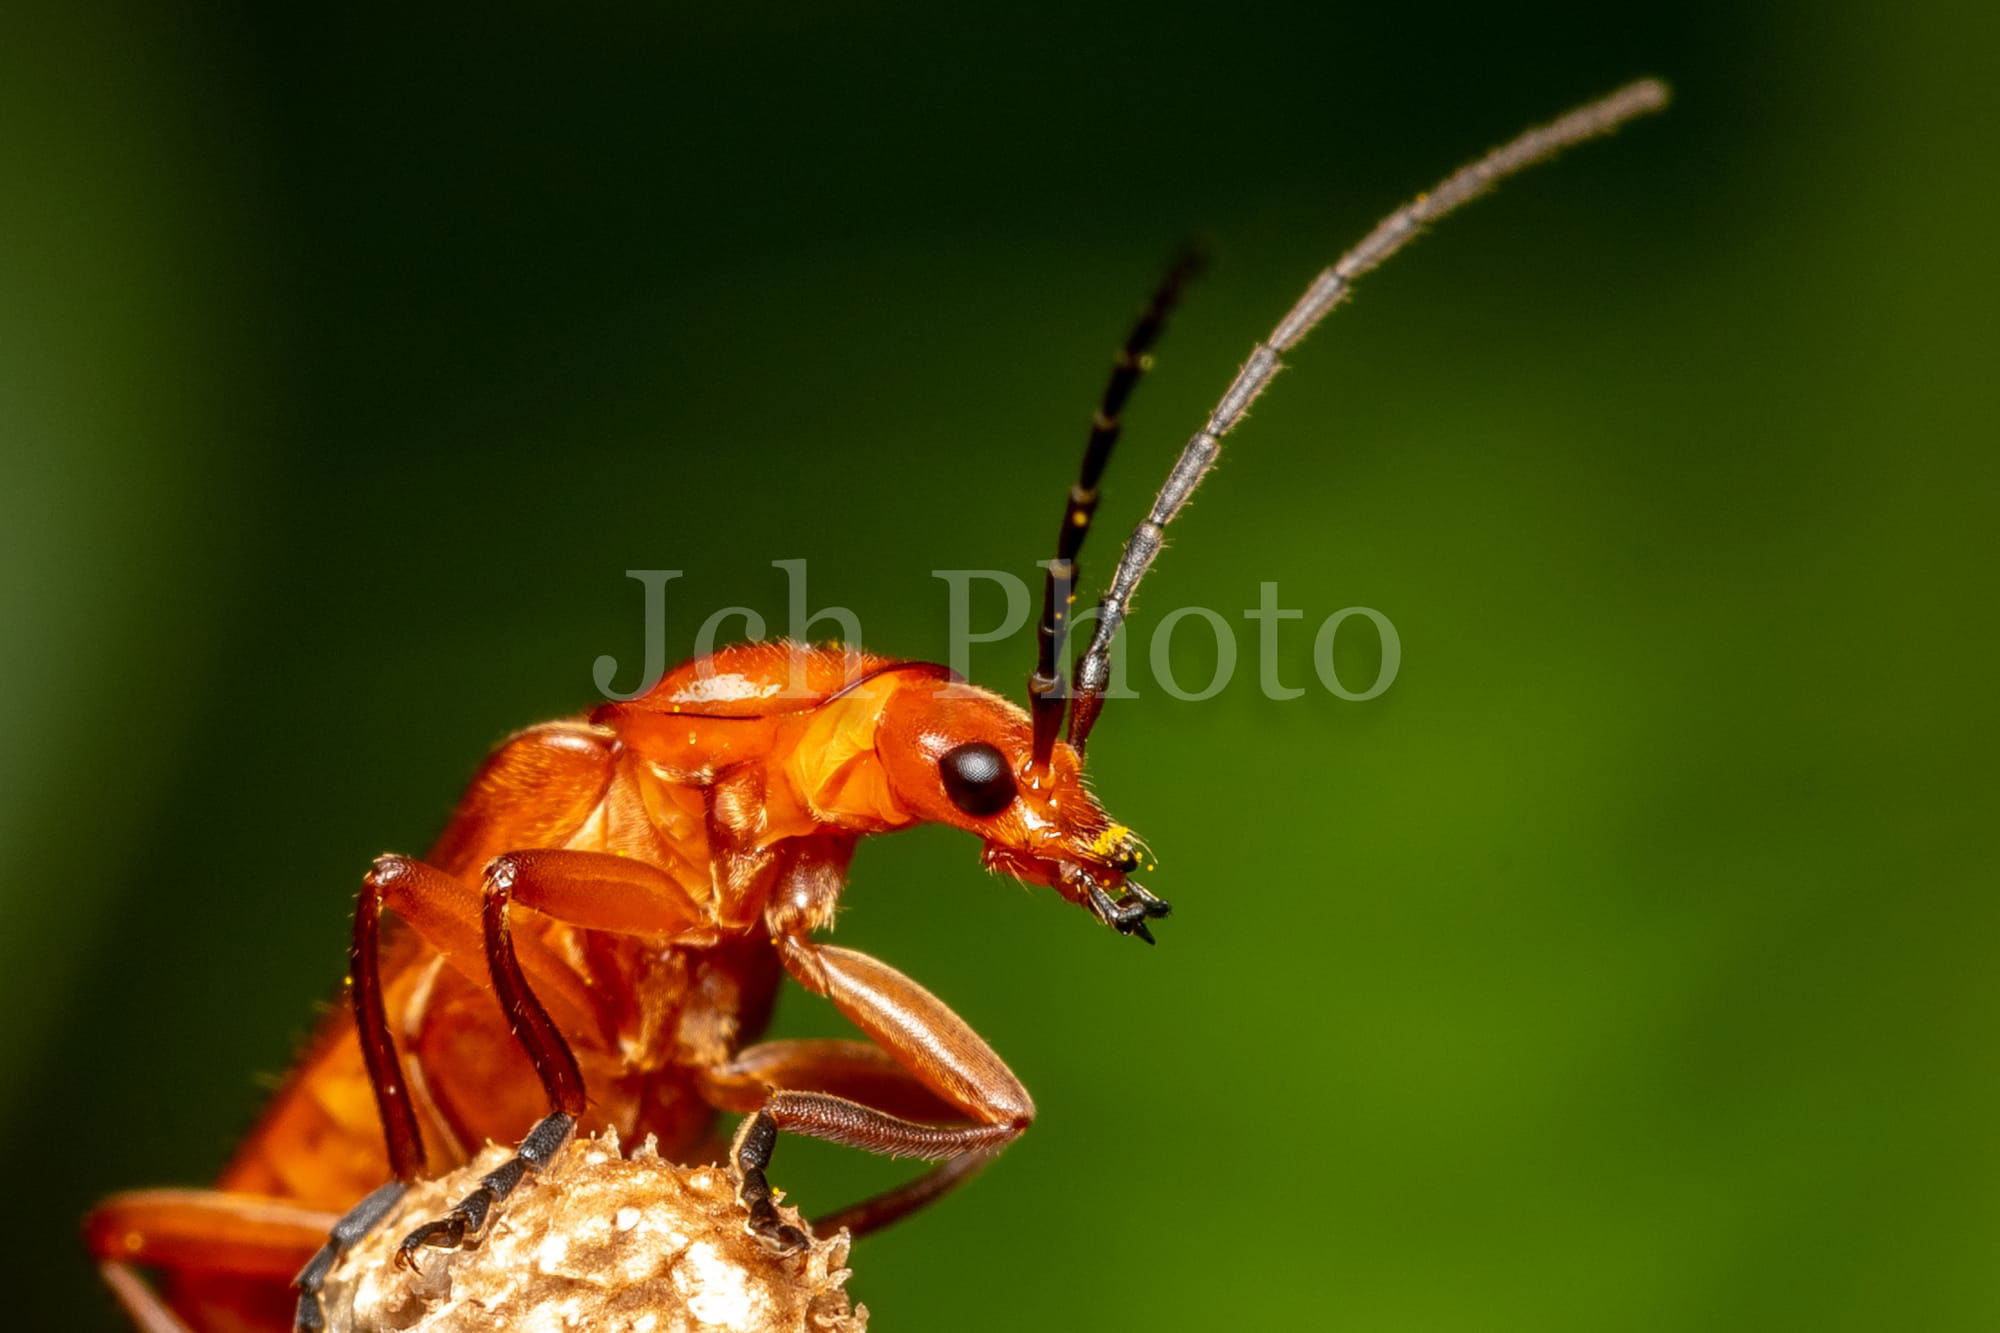 Common Red soldier beetle